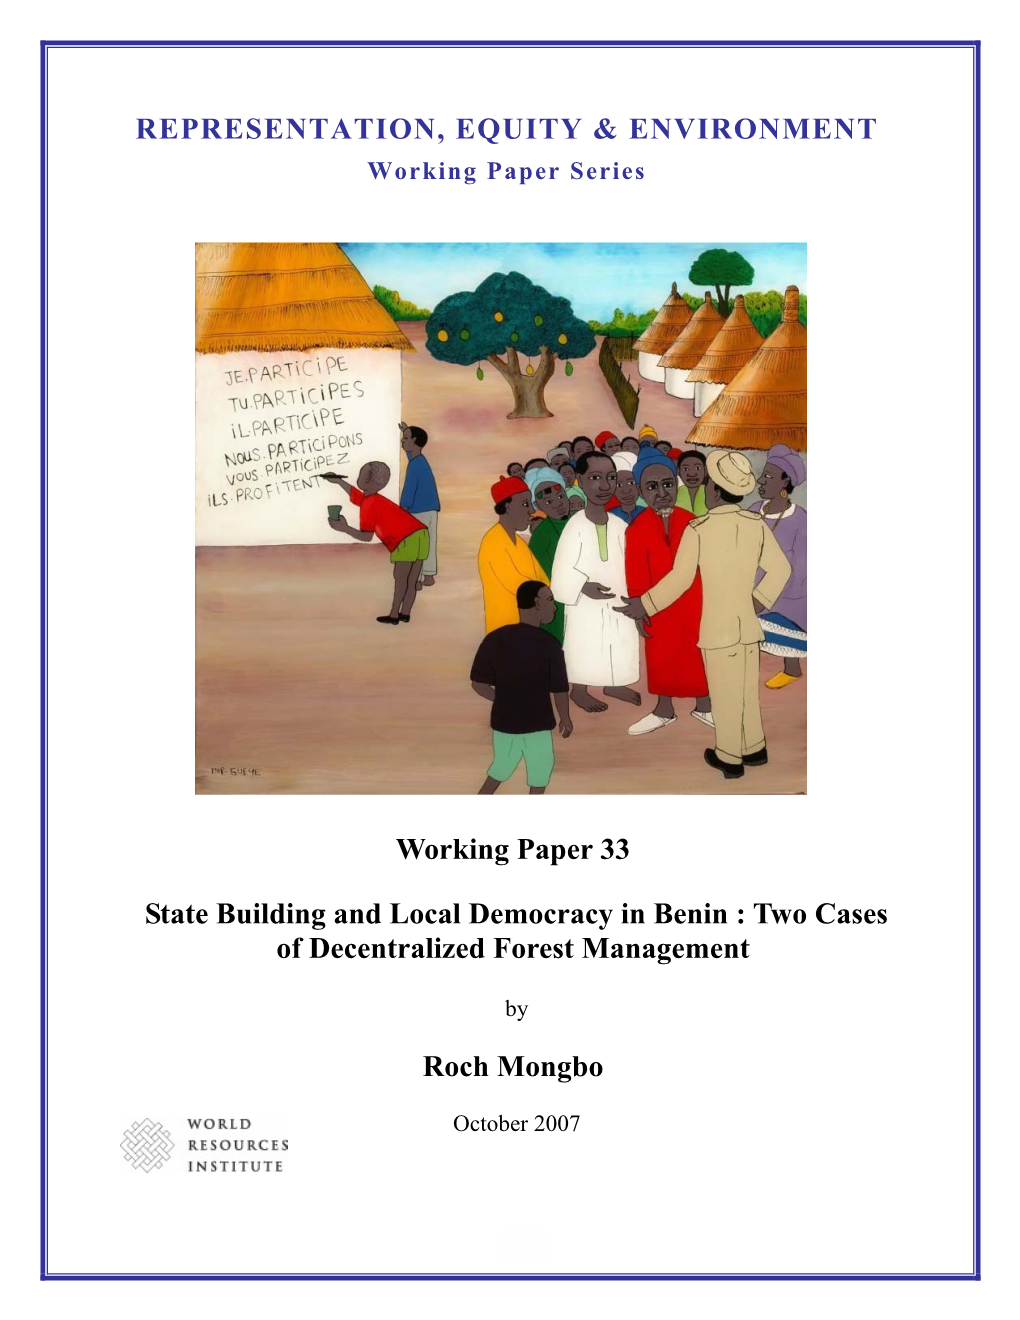 Working Paper 33